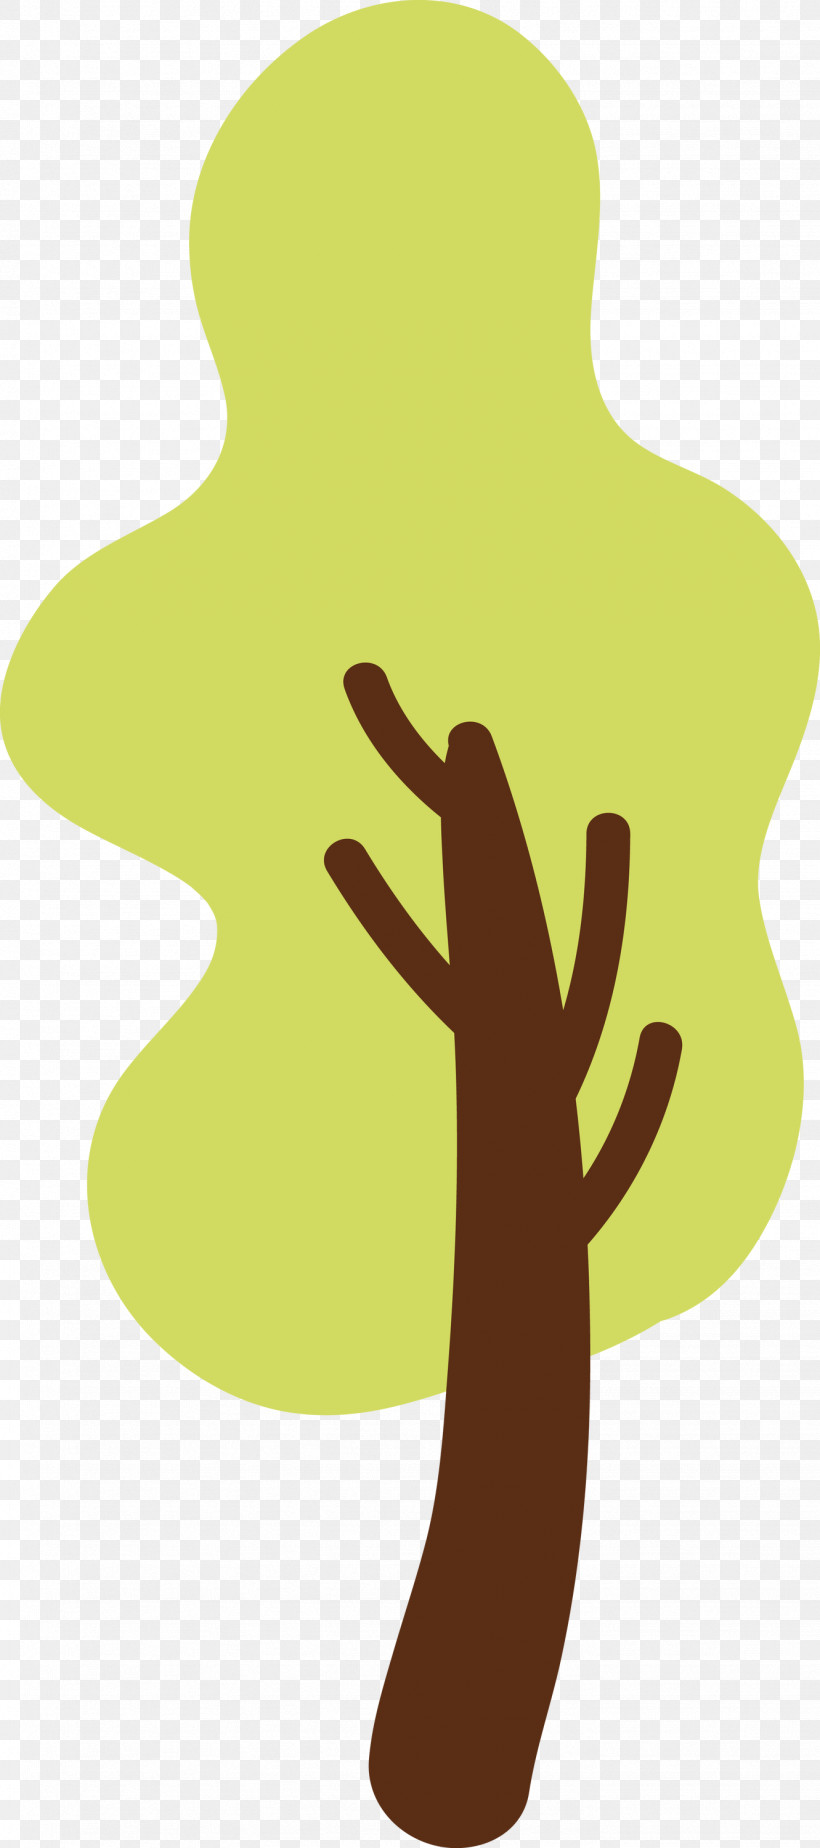 Green Hand Finger Gesture Thumb, PNG, 1331x3000px, Cartoon Tree, Abstract Tree, Finger, Gesture, Green Download Free